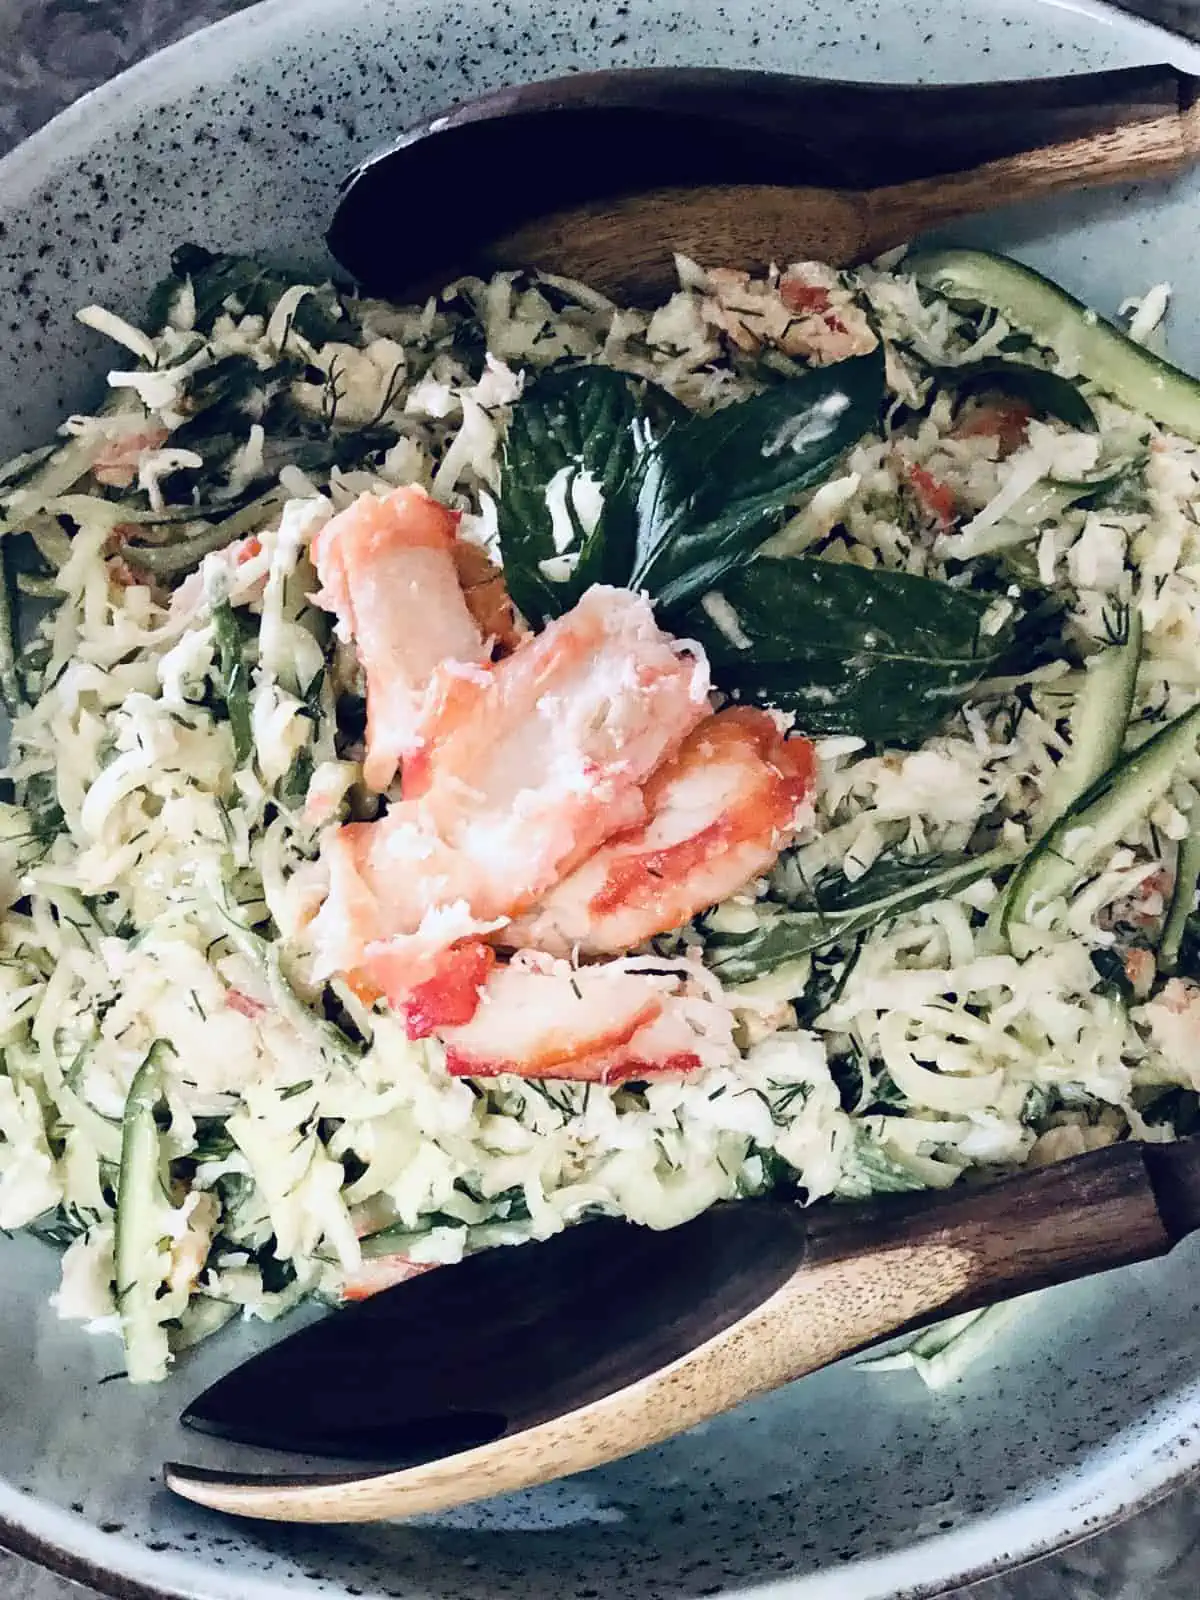 Crab meat salad in a stone-grey bowl with wooden servers.